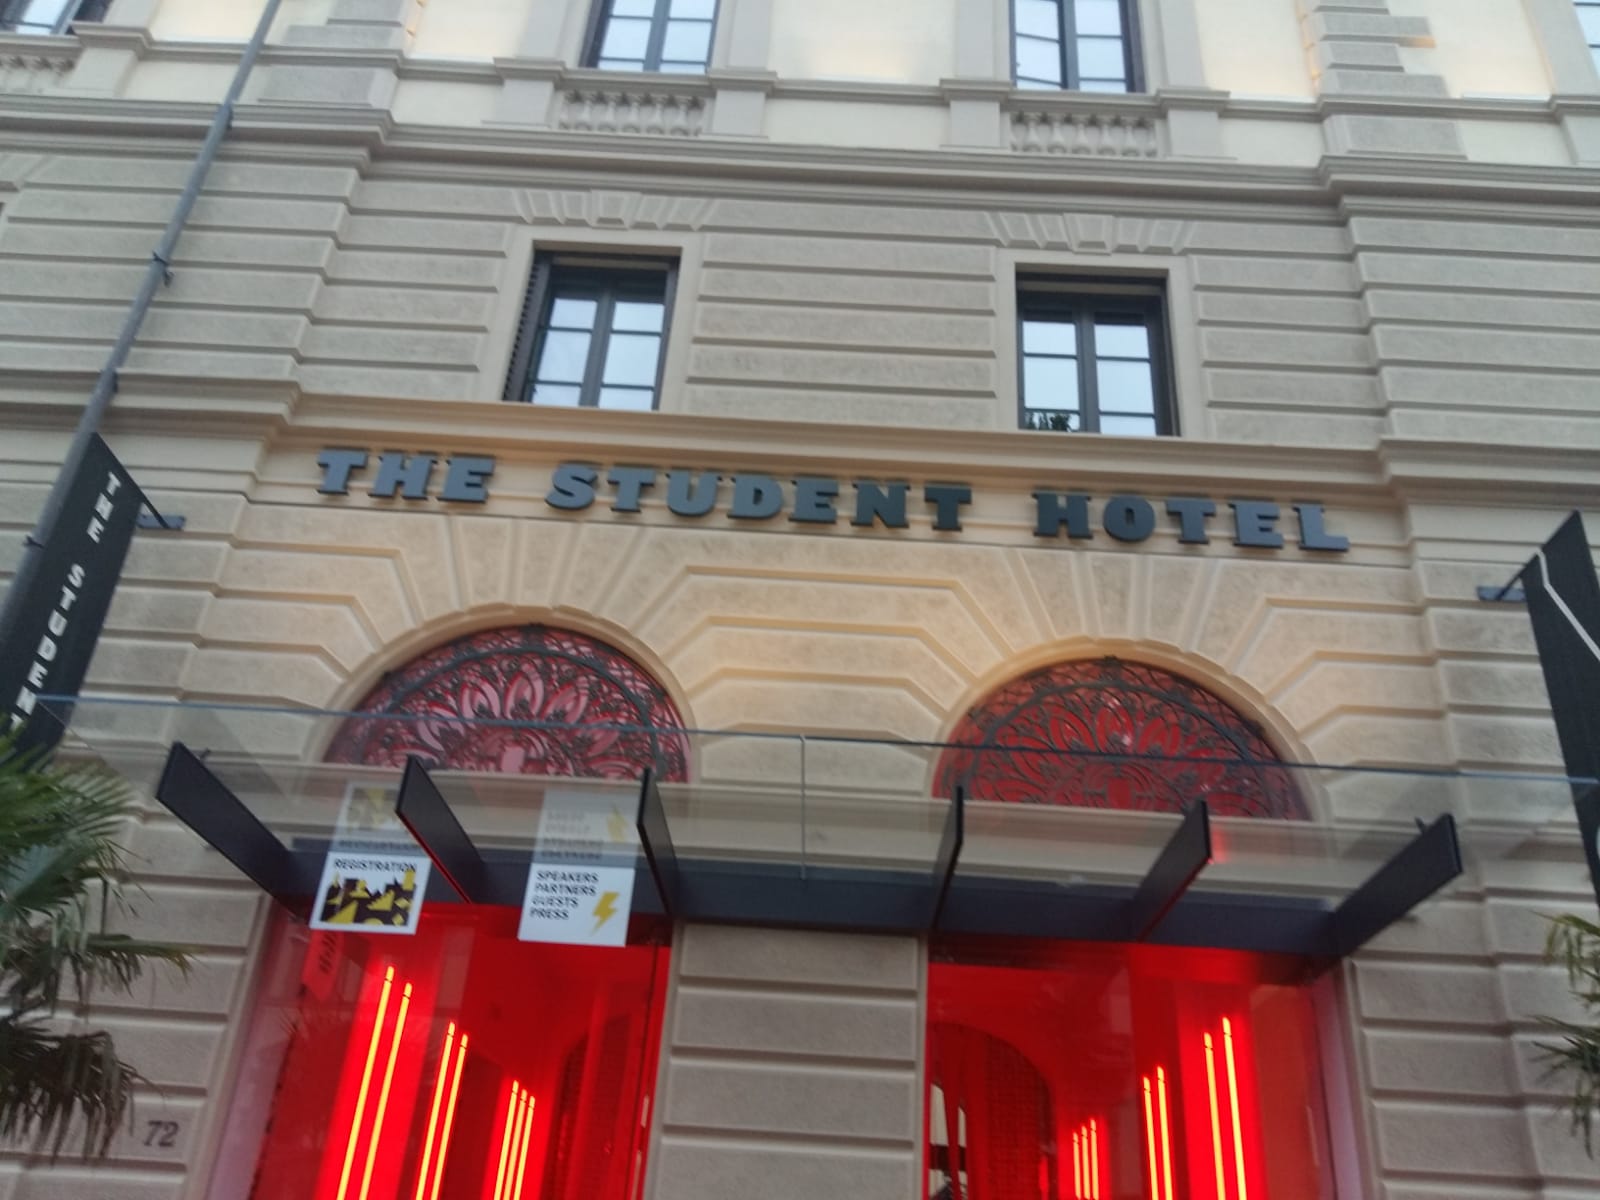 The Student Hotel opens today in Florence